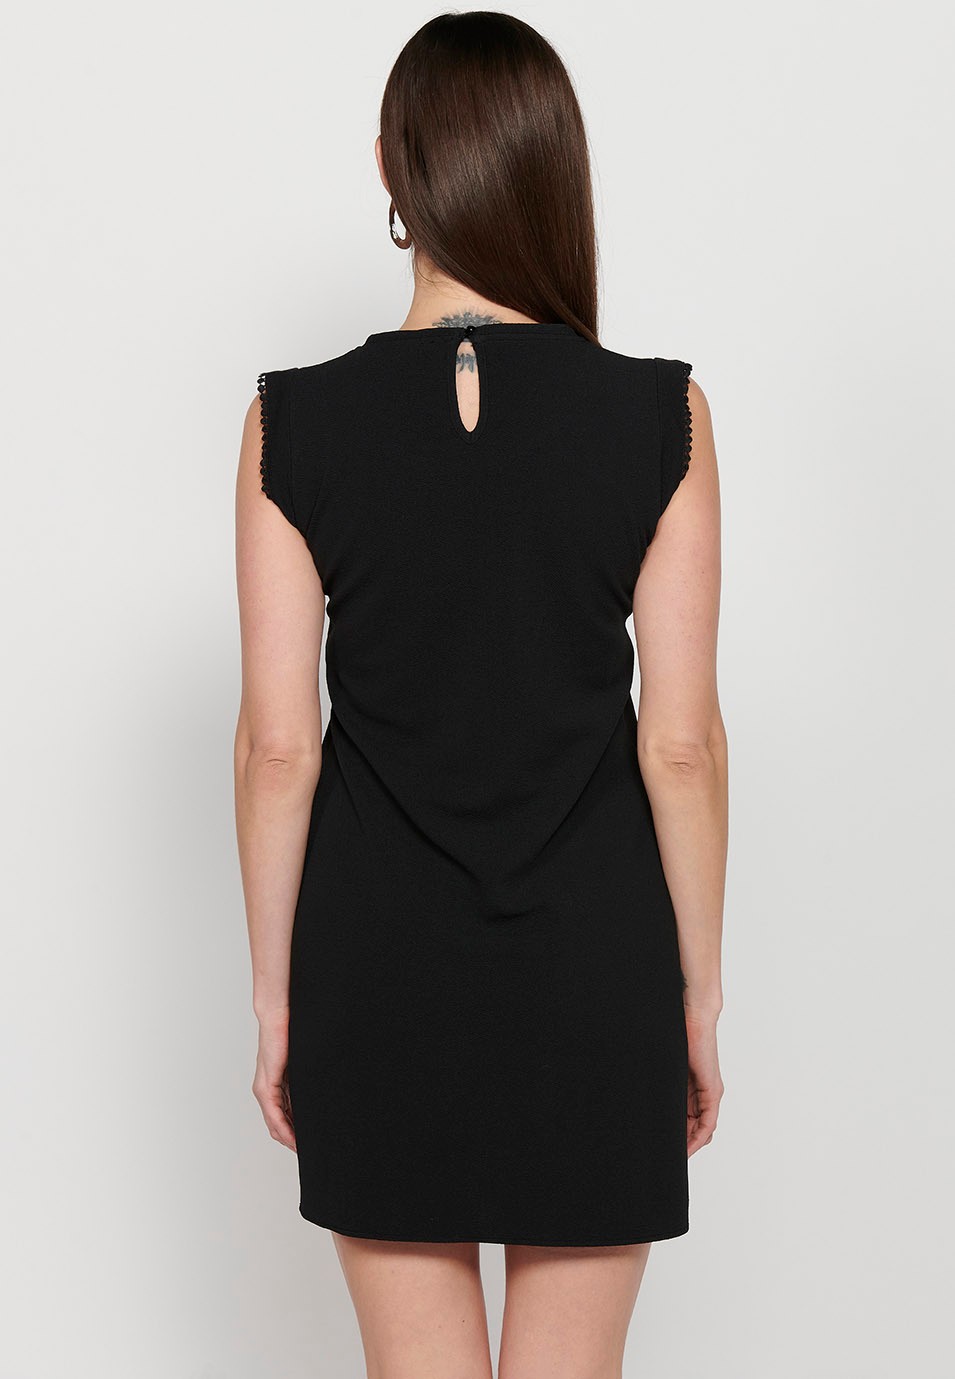 Short half-sleeve dress with detail with round neck and back closure with button in Black for Women 4